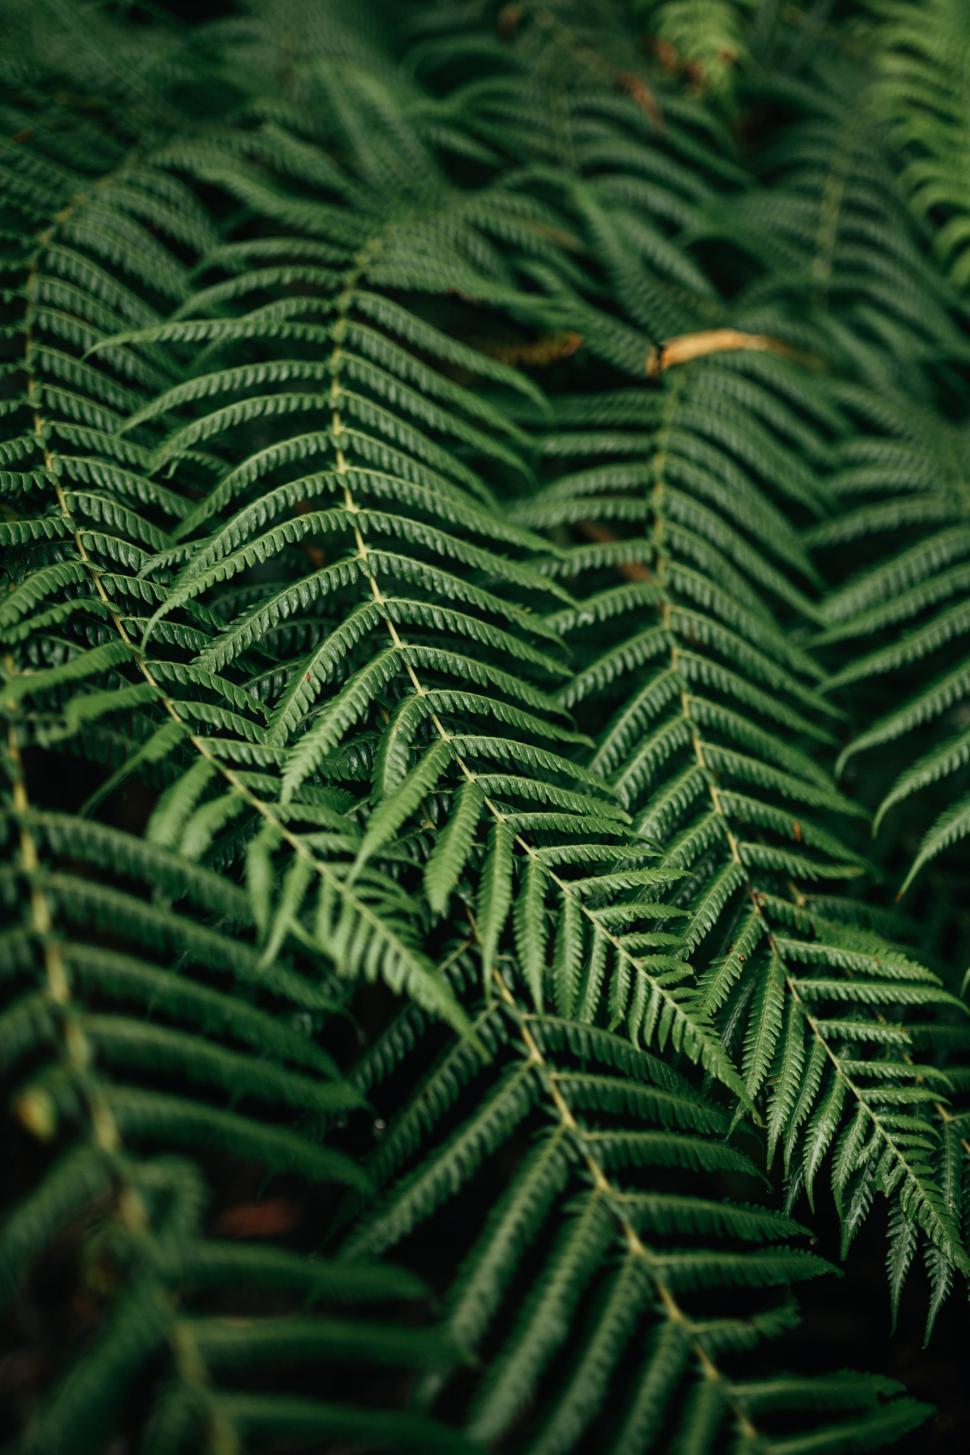 Free Image of Green Plant With Abundant Leaves Close-Up 